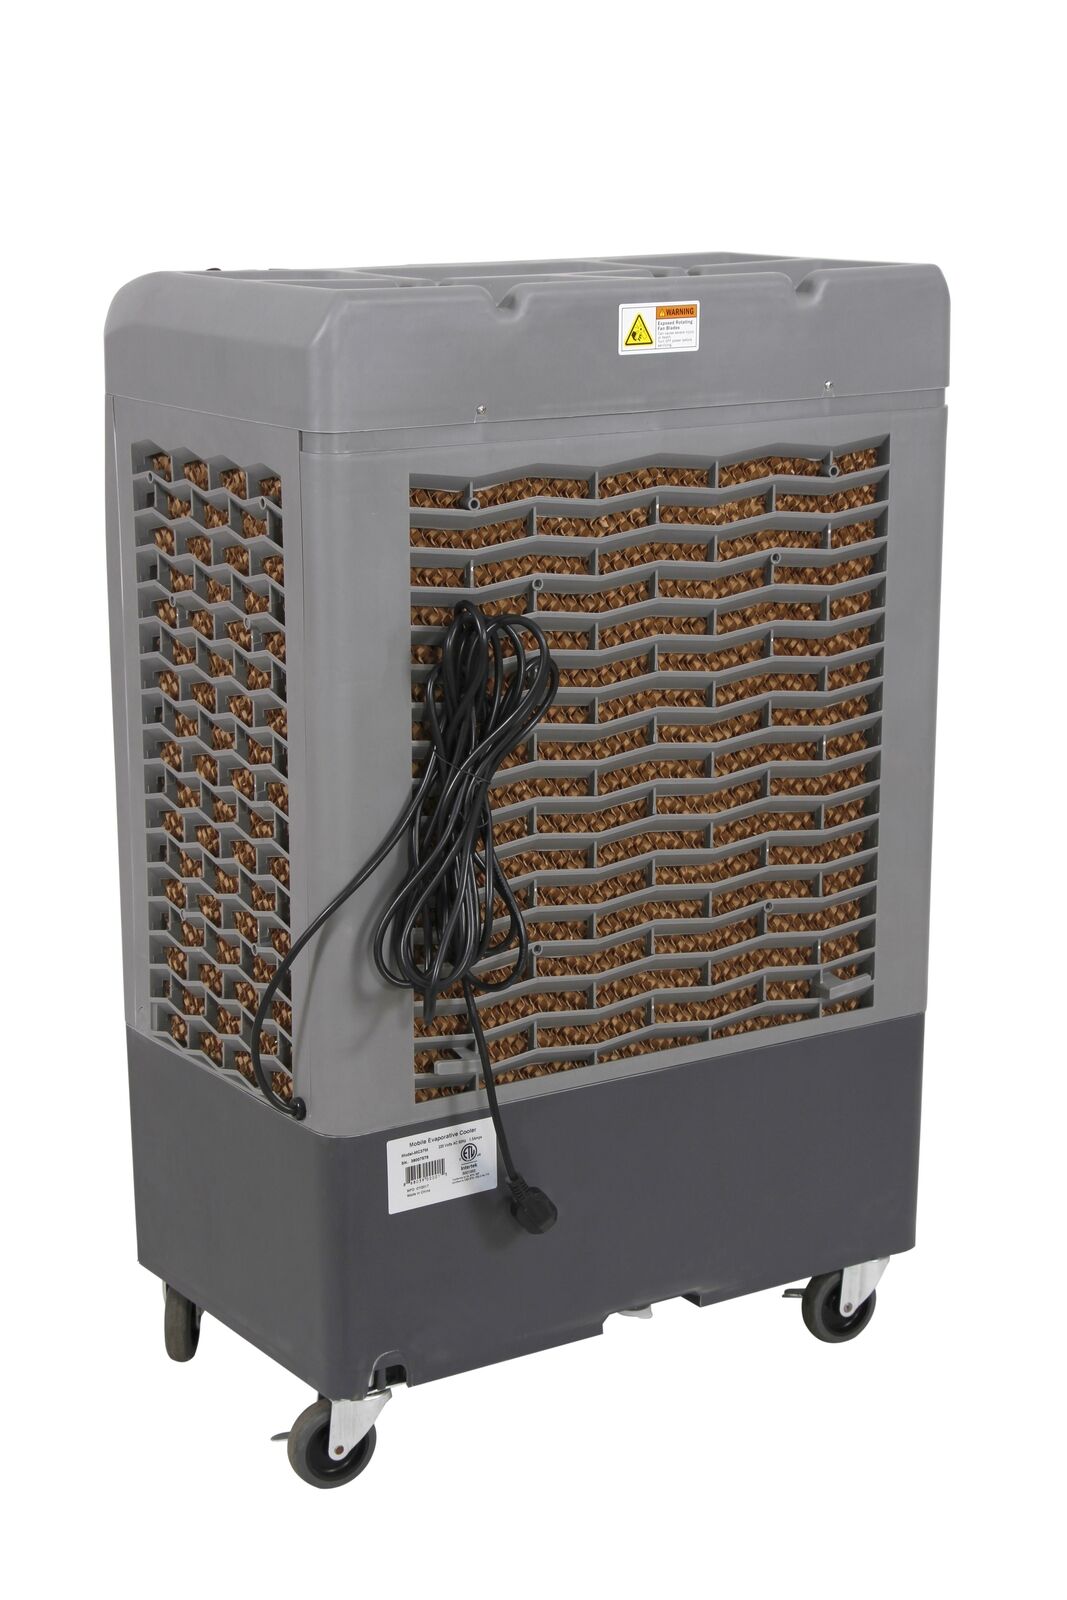 Hessaire MC37M Indoor/Outdoor Portable 950 Sq Ft Evaporative Air Cooler - image 3 of 16